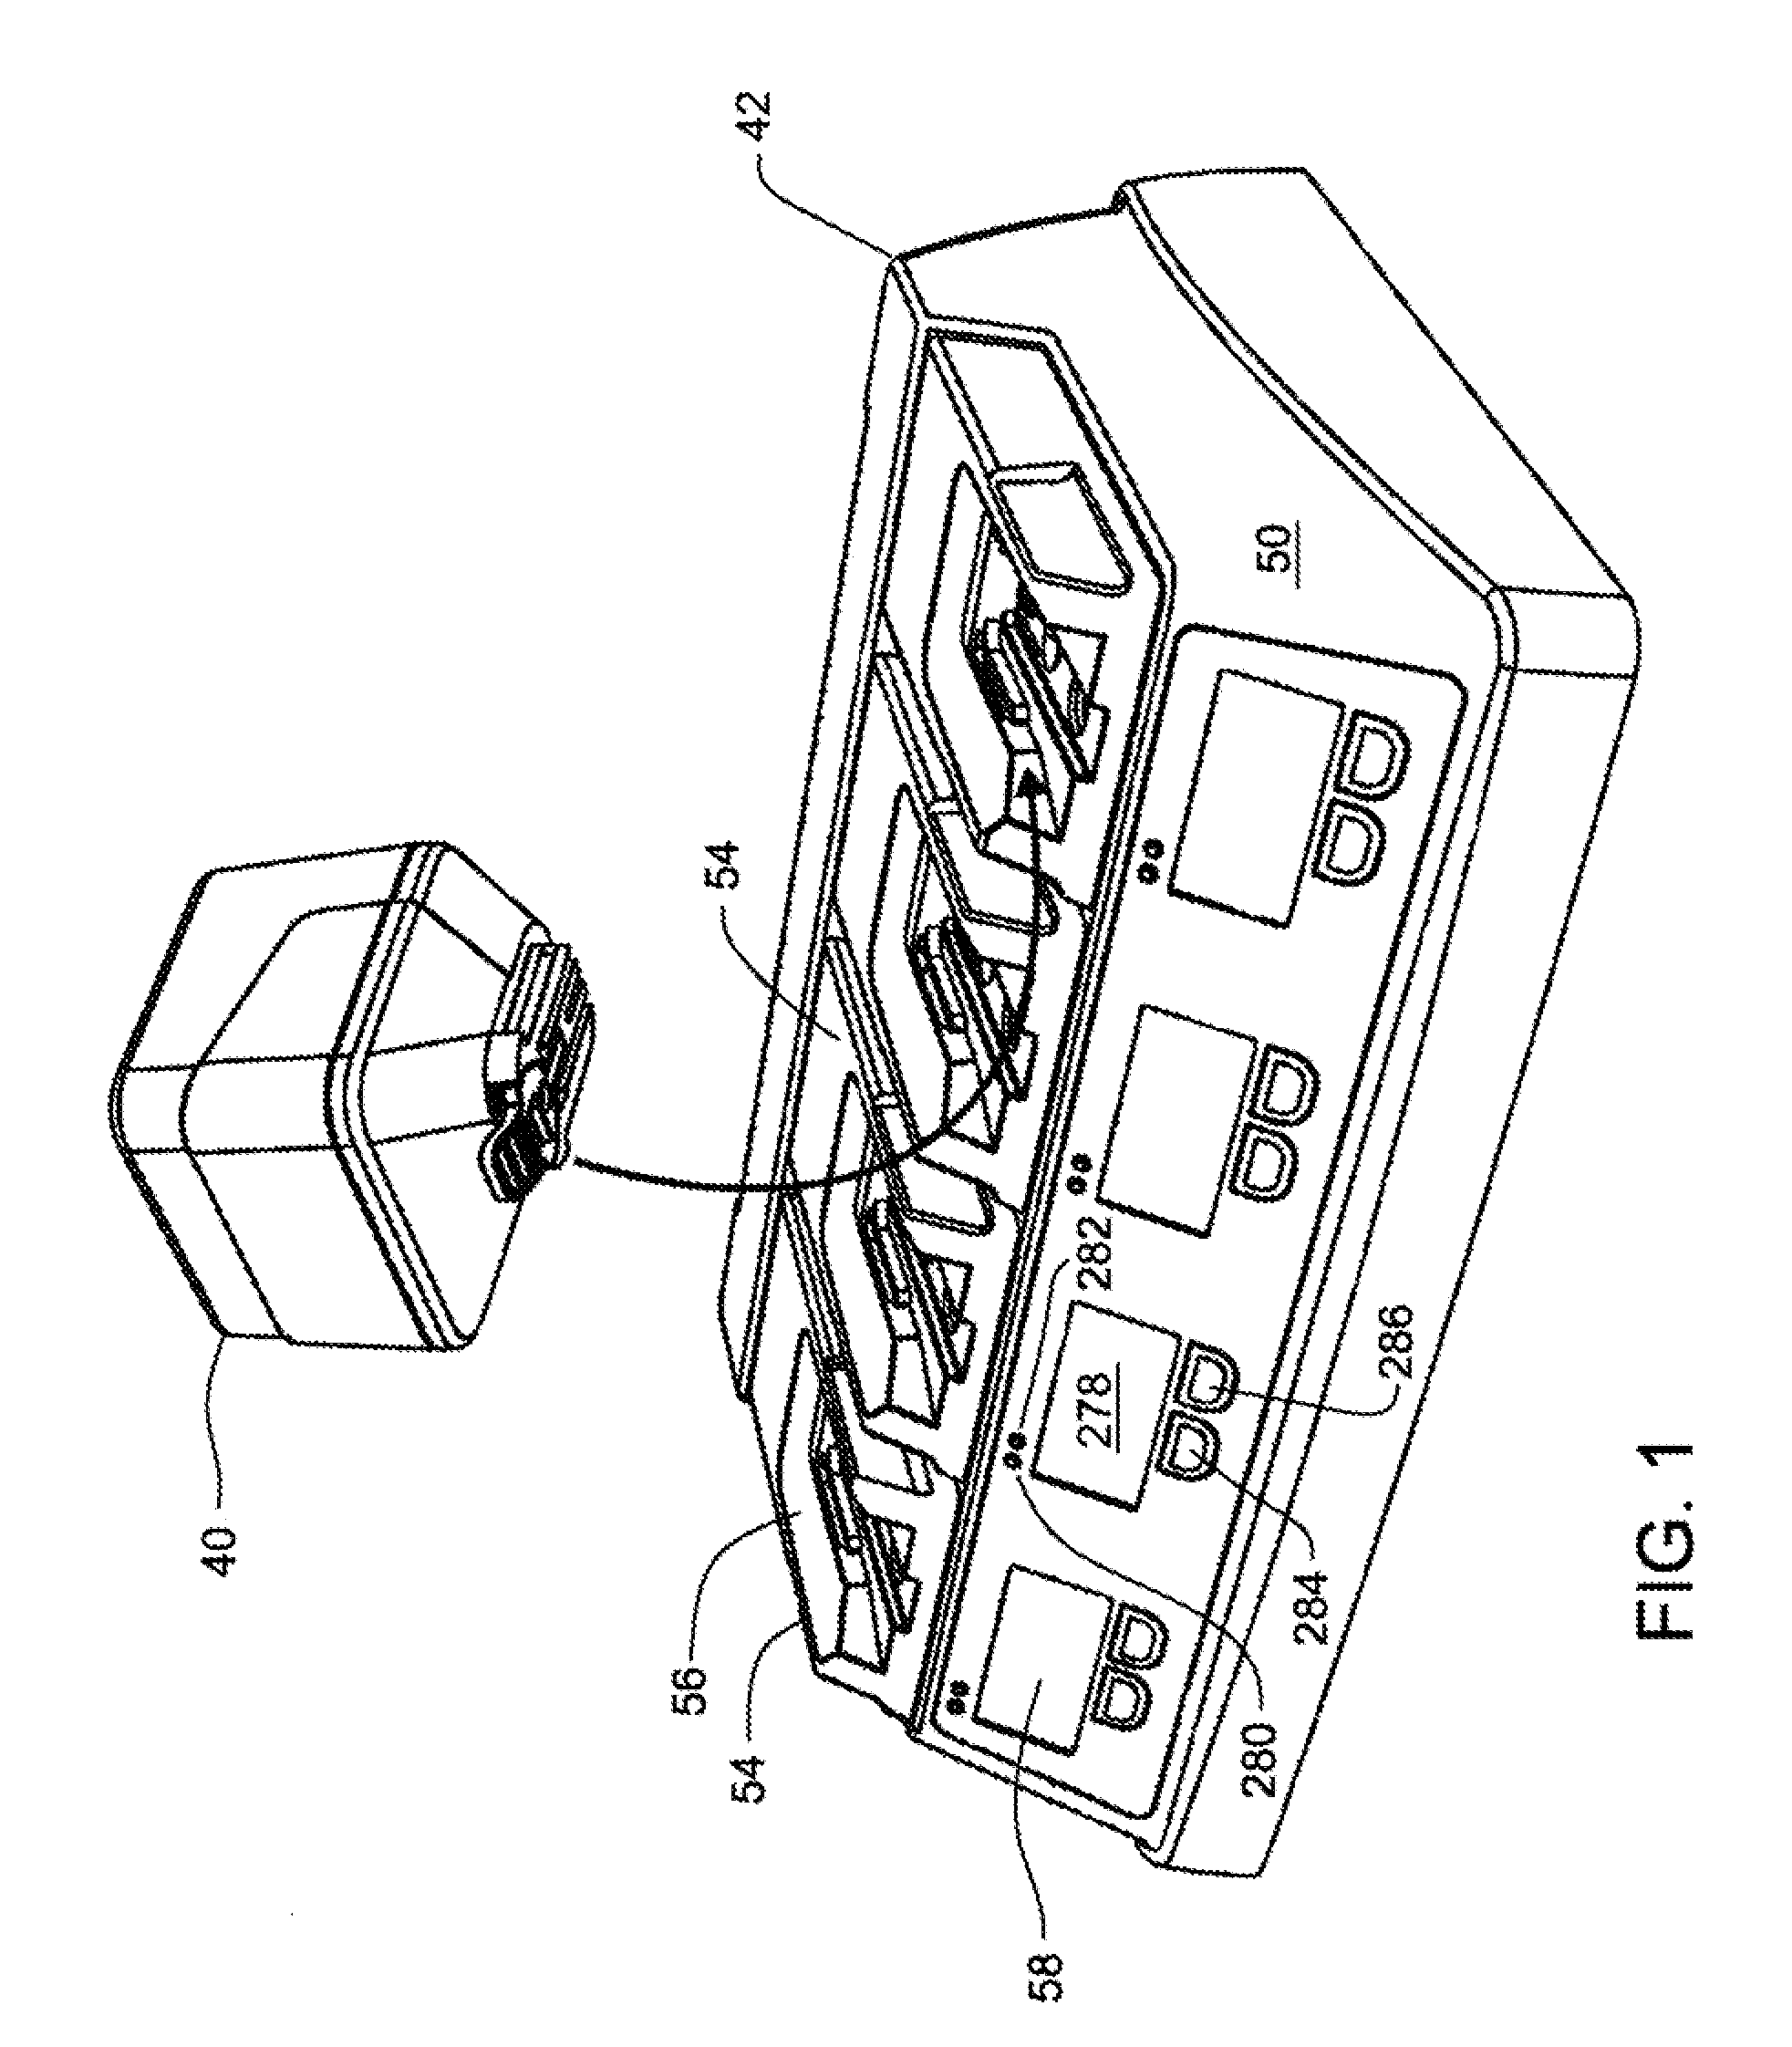 BATTERY CHARGER CAPABLE OF SELECTIVELY PERFORMING A PARTIAL OR FULL STATE-Of-HEALTH EVALUATION ON A BATTERY BASED ON THE HISTOR OF THE BATTERY